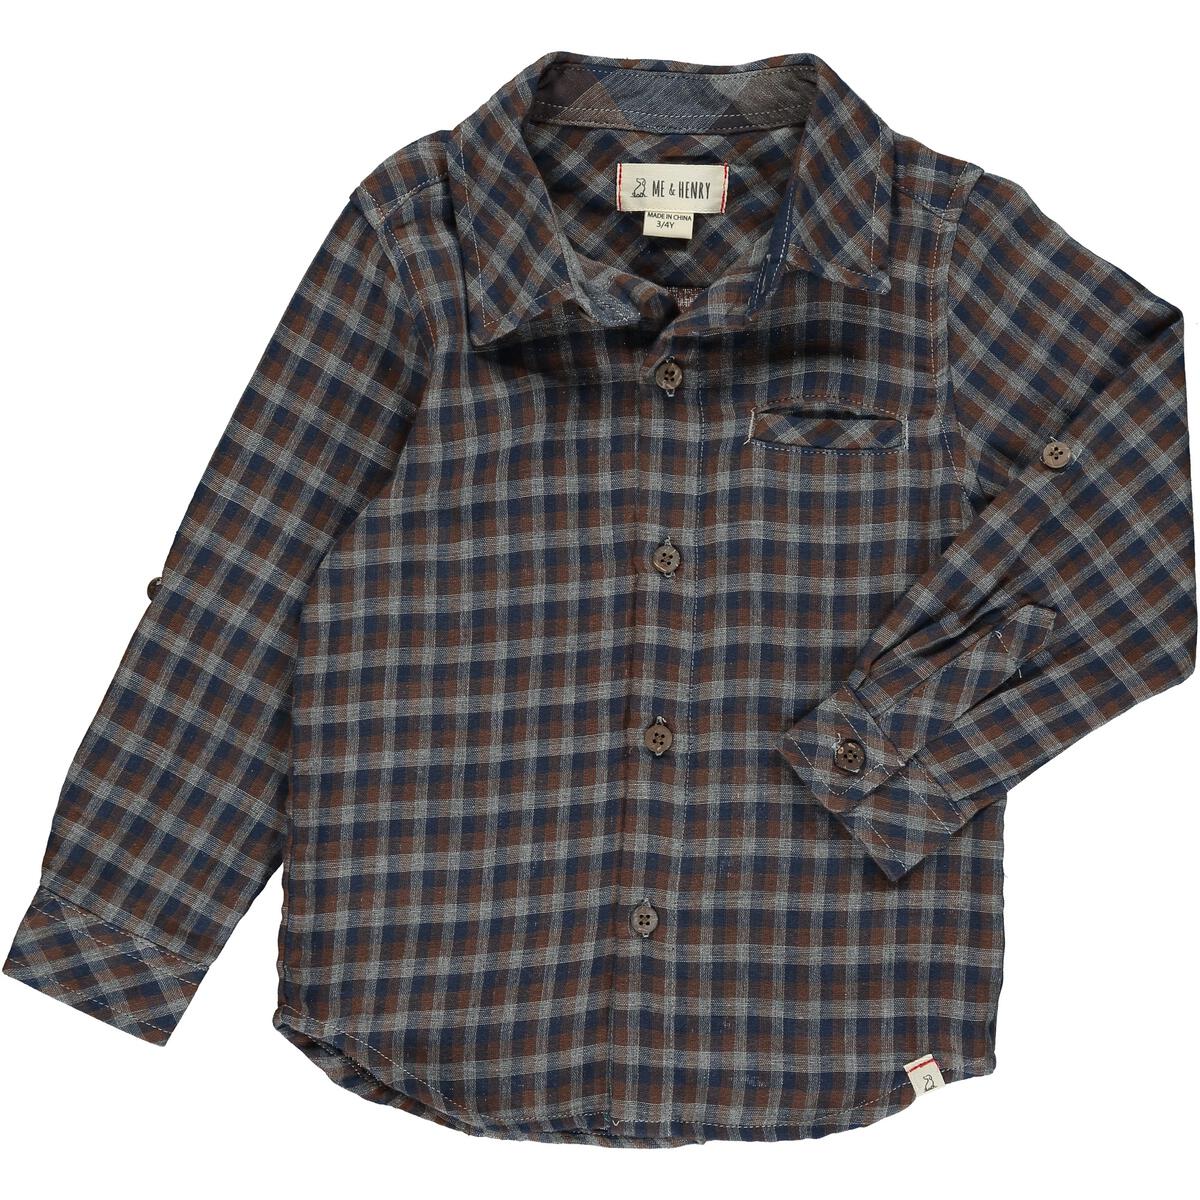 Atwood Woven Shirt in Brown/Grey